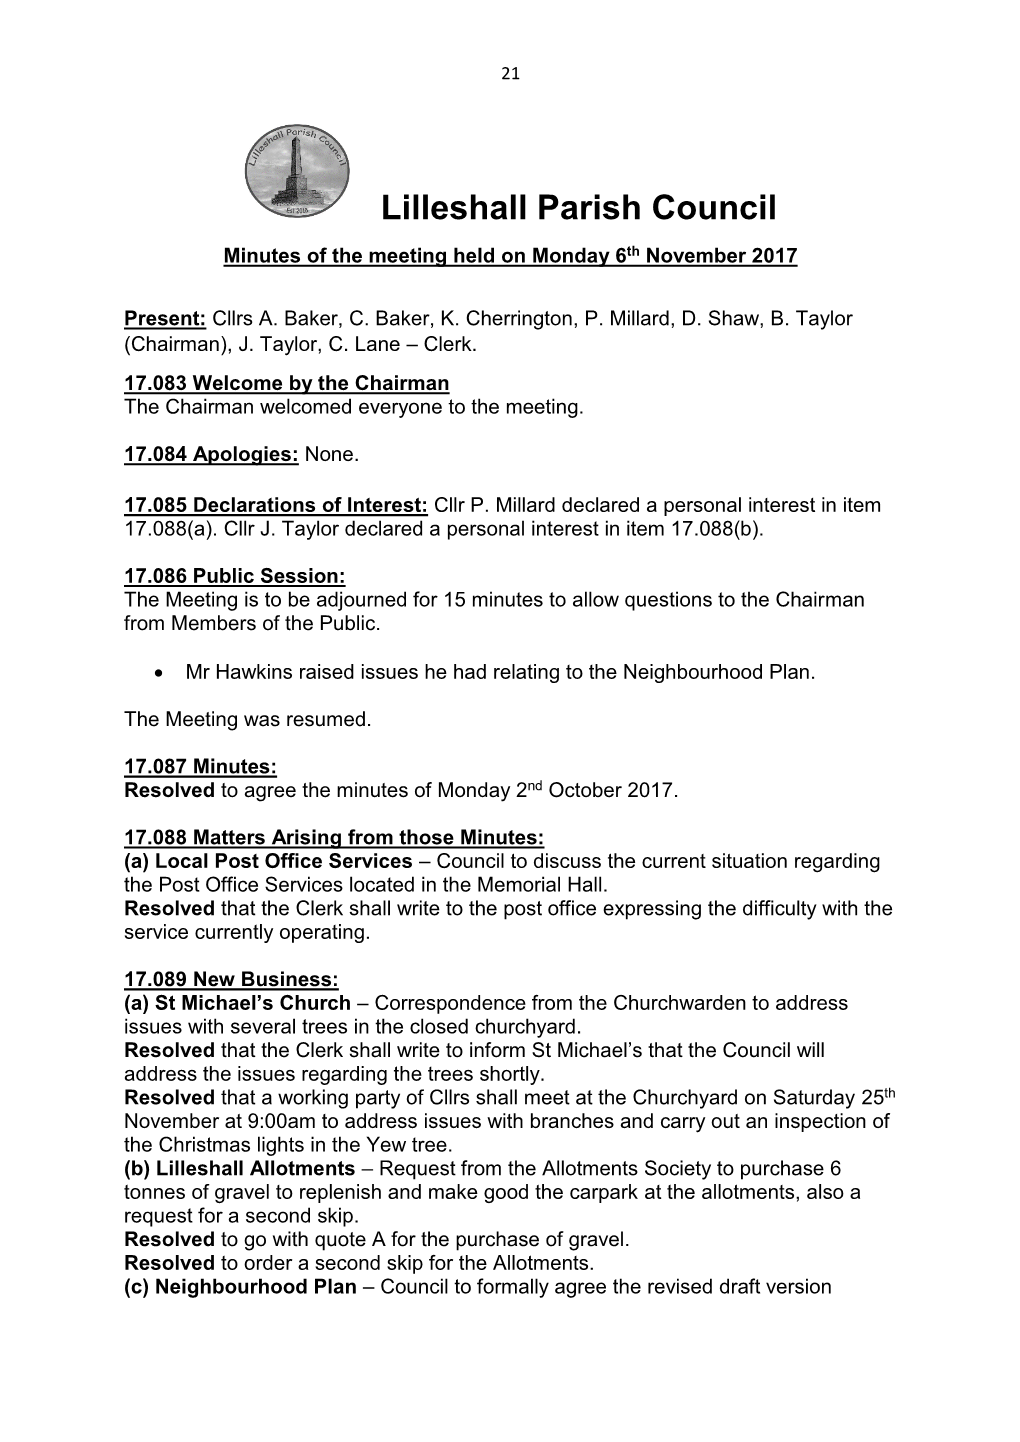 Lilleshall Parish Council Minutes of the Meeting Held on Monday 6Th November 2017